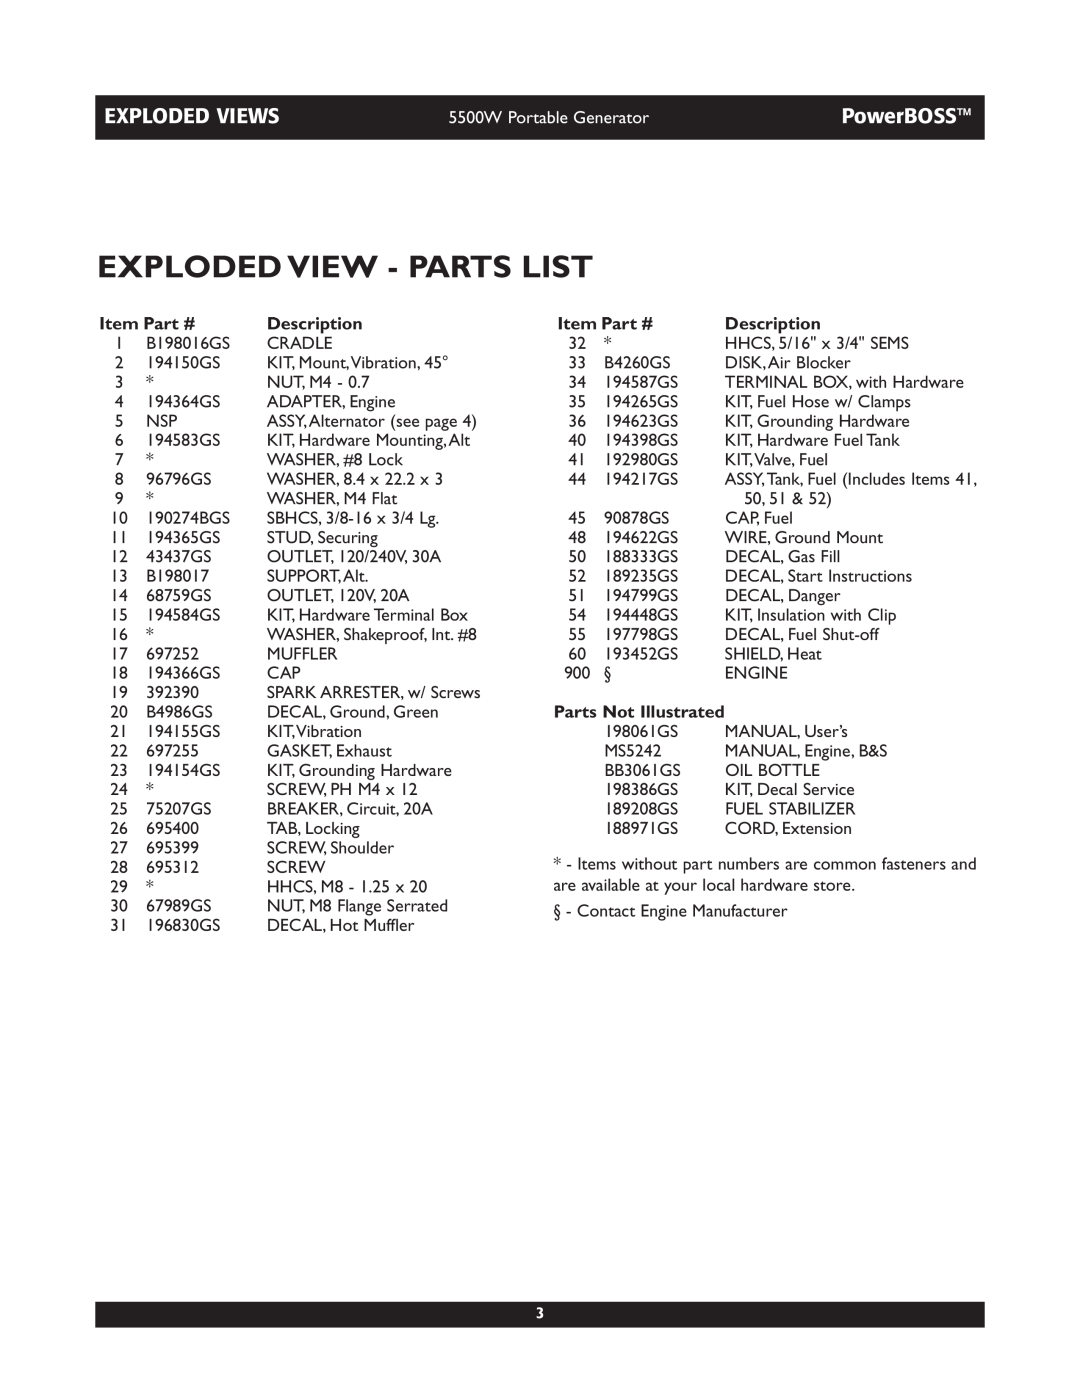 Briggs & Stratton 30255 manual Exploded View - Parts List, Exploded Views, Description, Parts Not Illustrated, PowerBOSS 